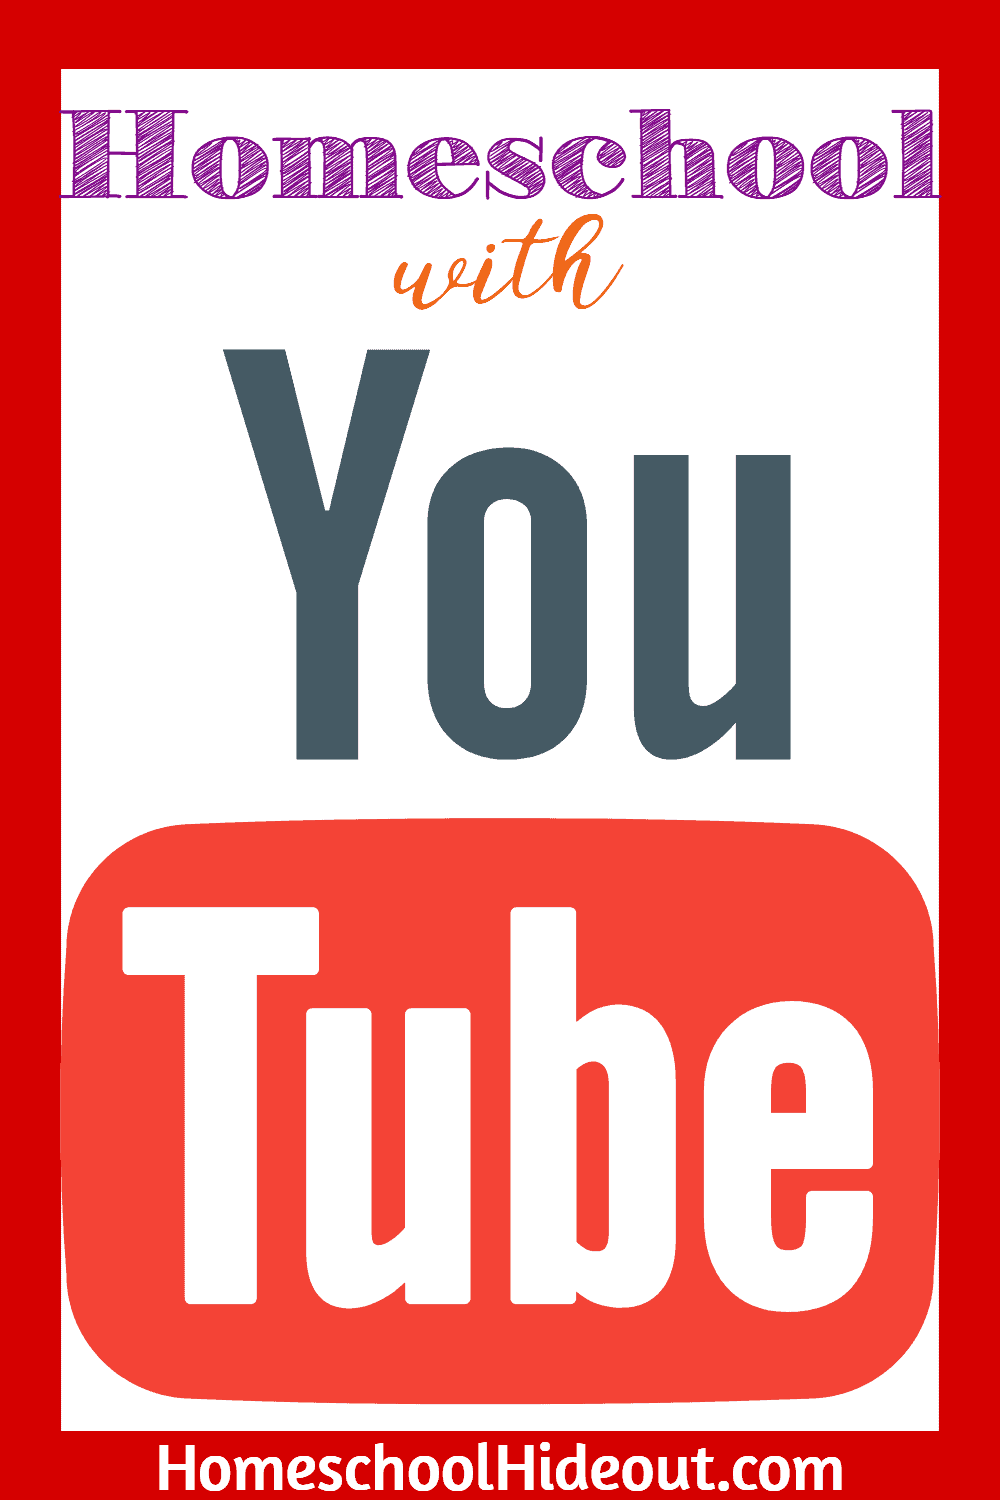 Make learning fun with educational YouTube Channels! #technology #homeschool #YouTube #homeschoolers #onlinelearning